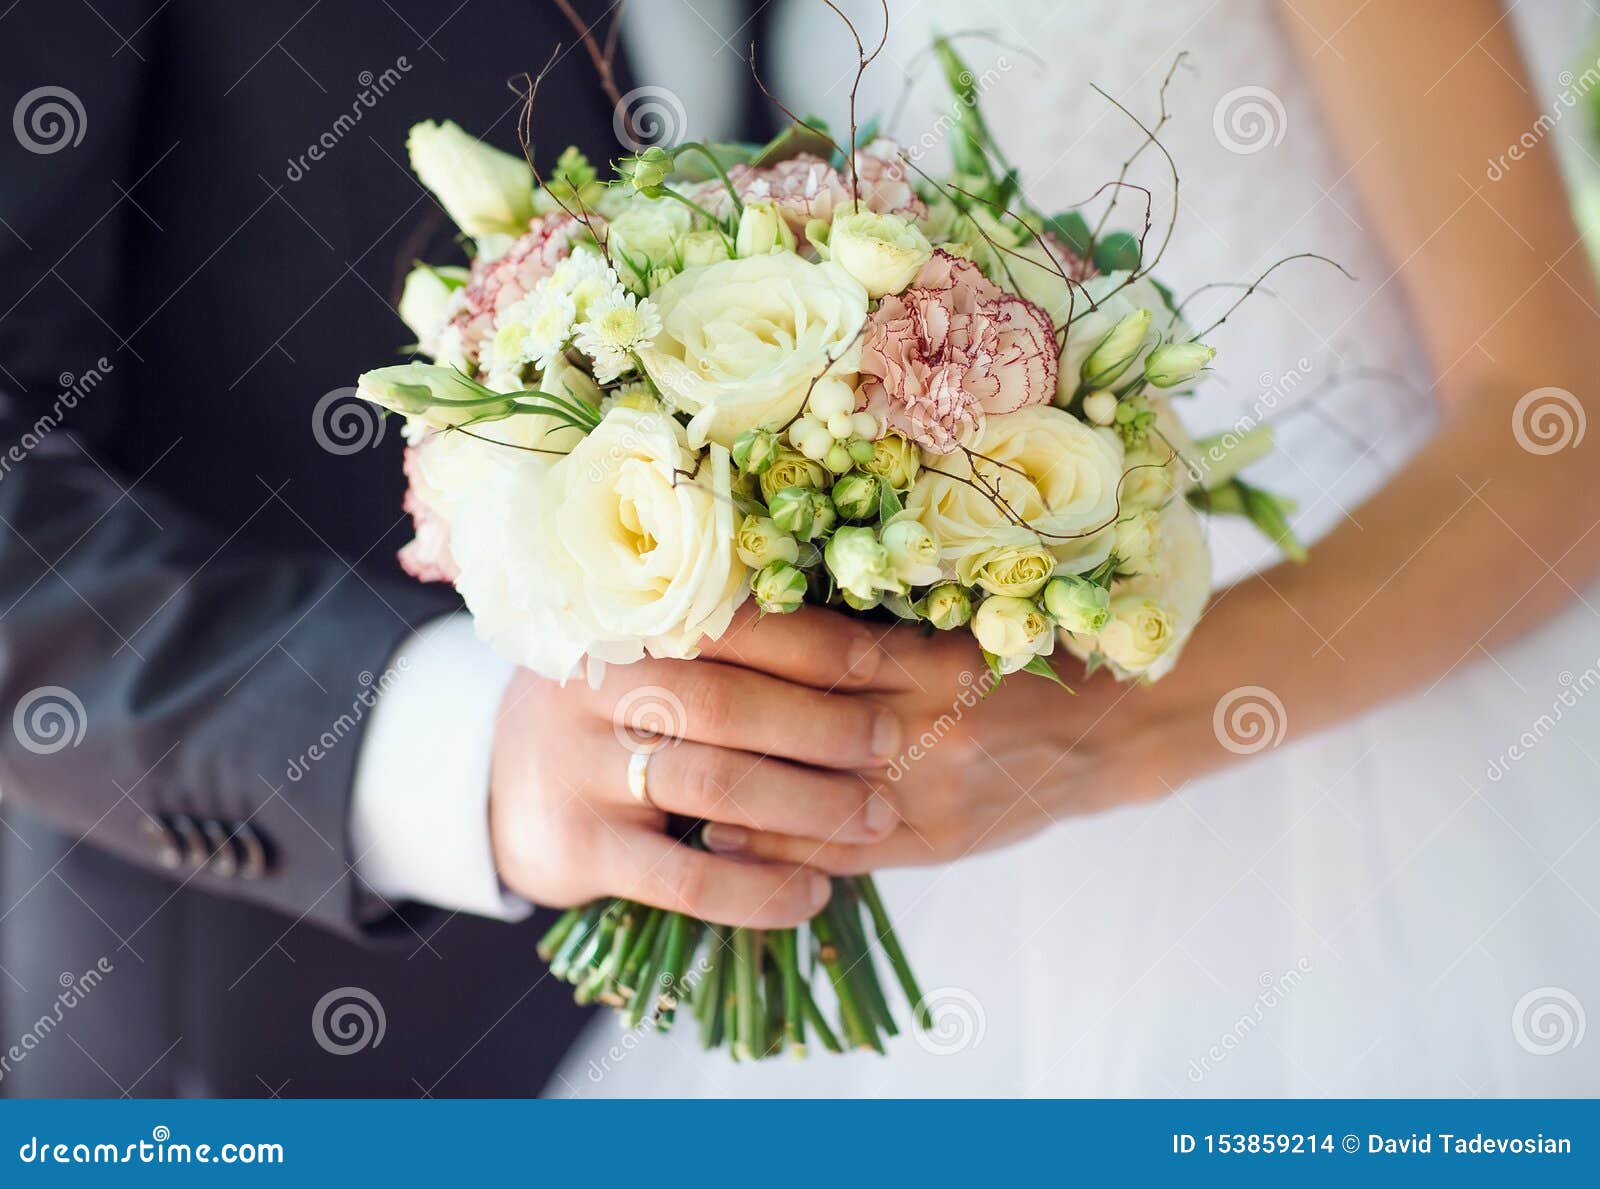 Bride and Groom Holding Wedding Bouquet Hand in Hand. Stock Photo ...